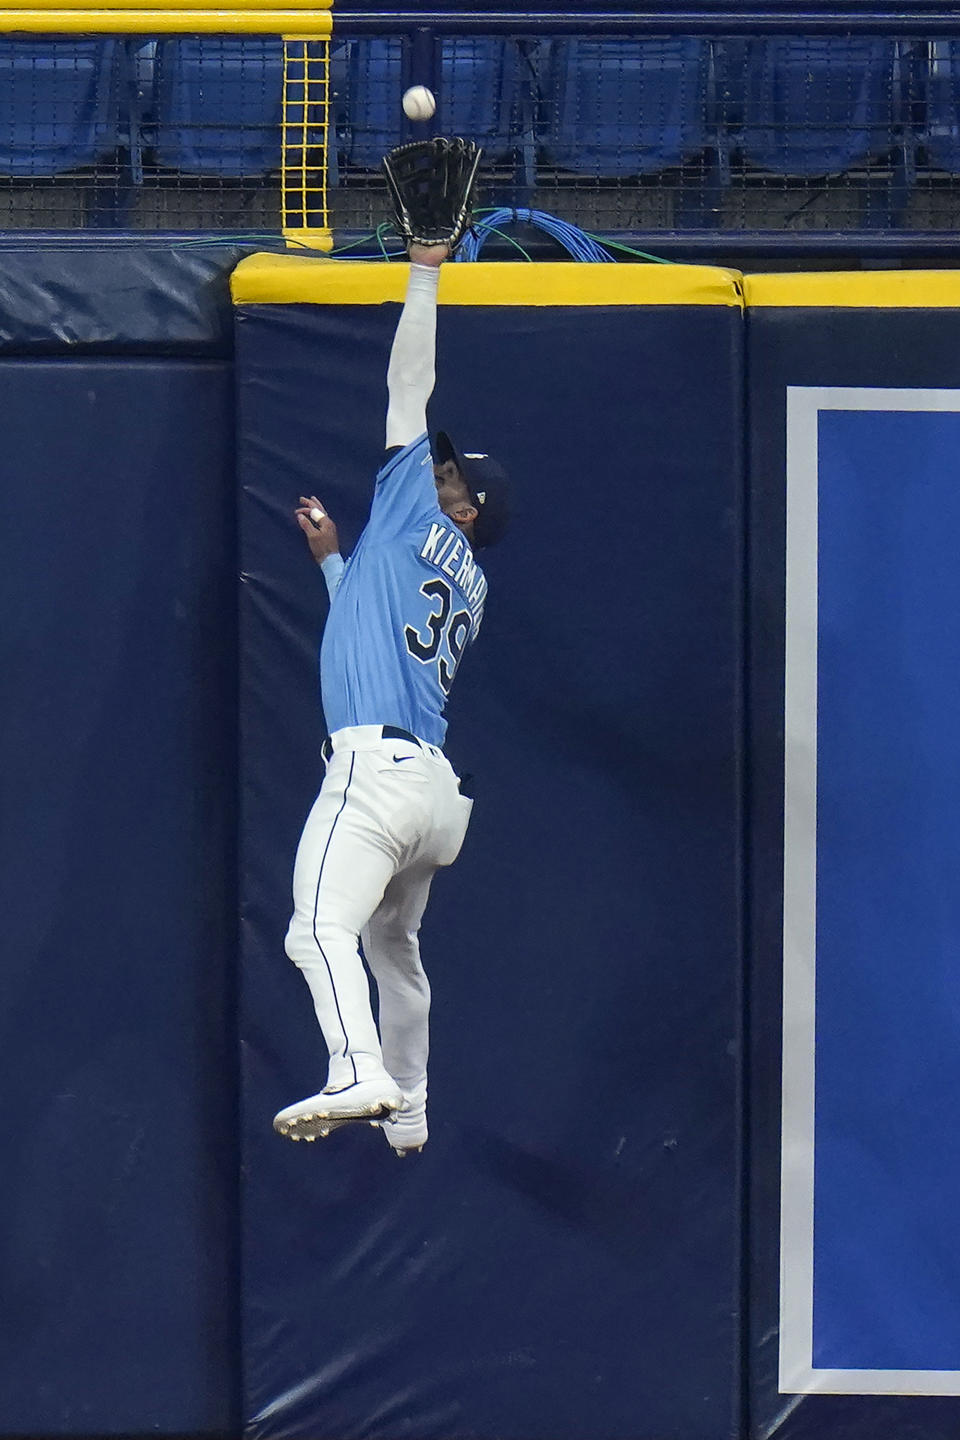 Tampa Bay Rays center fielder Kevin Kiermaier makes a leaping catch on a fly out by Kansas City Royals' Andrew Benintendi during the eighth inning of a baseball game Tuesday, May 25, 2021, in St. Petersburg, Fla. (AP Photo/Chris O'Meara)